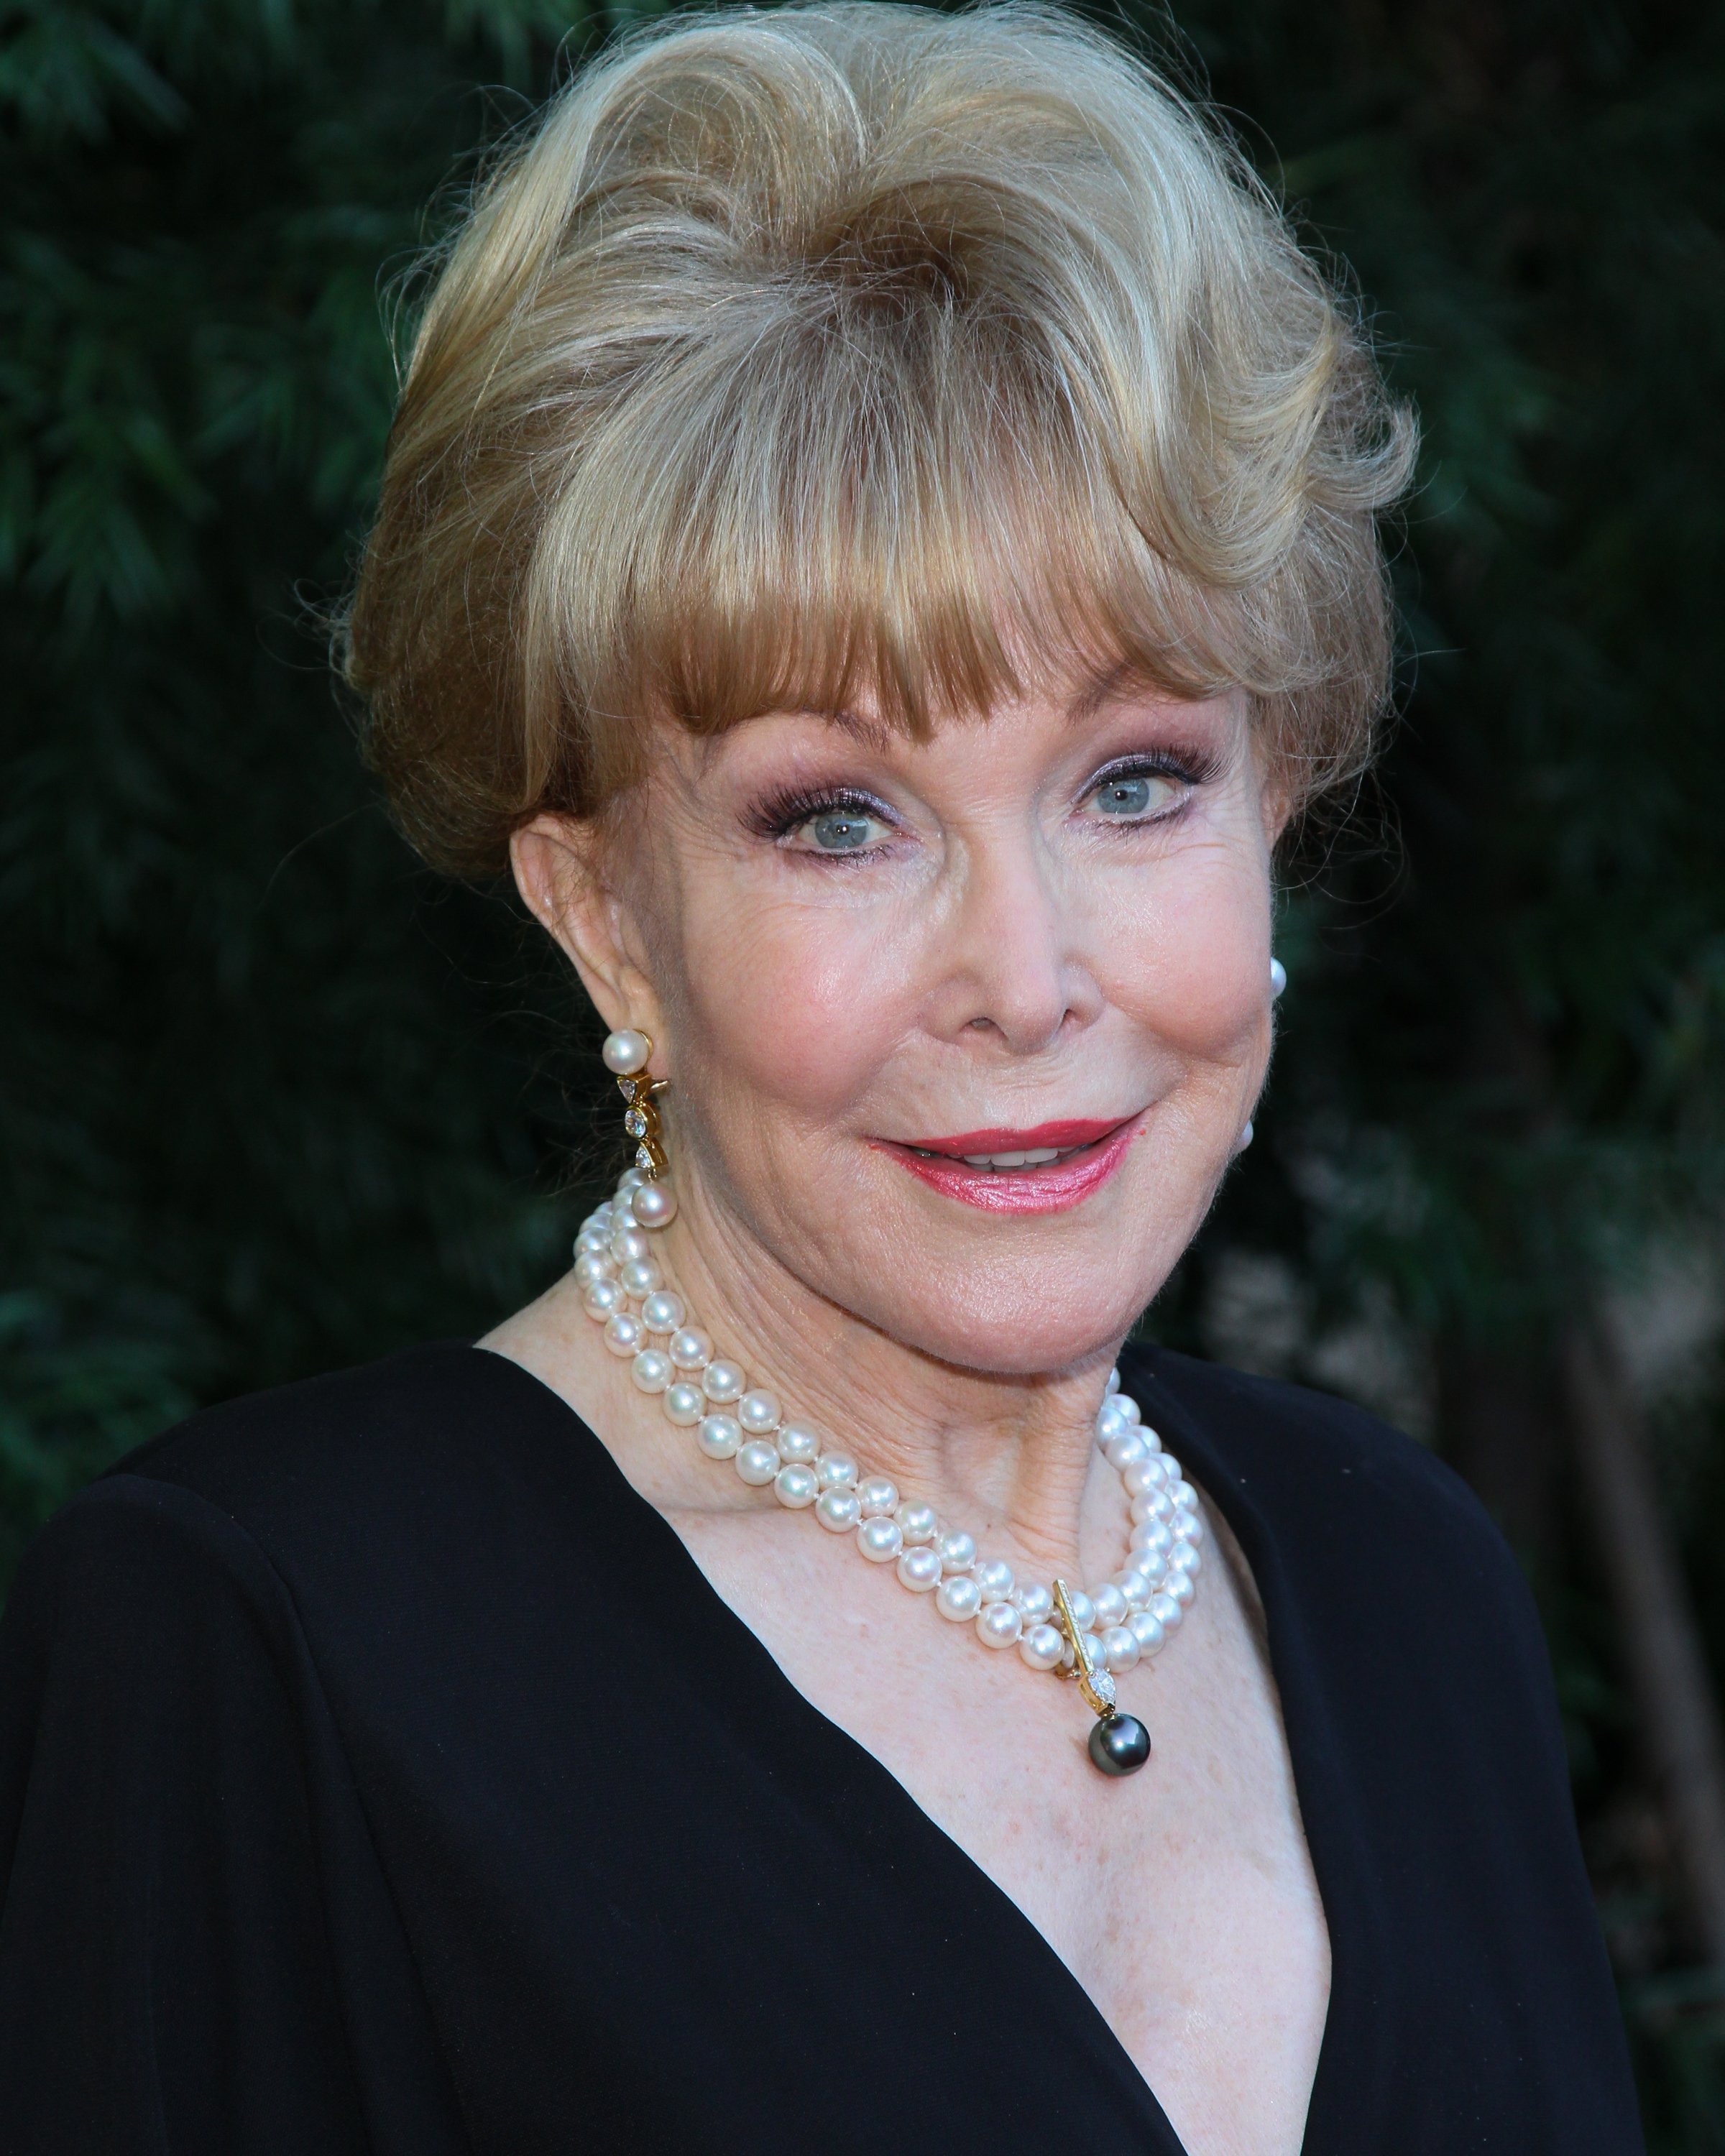 Actress Barbara Eden attends the 2012 Saturn Awards on July 26, 2012, in Burbank, California. | Source: Getty Images